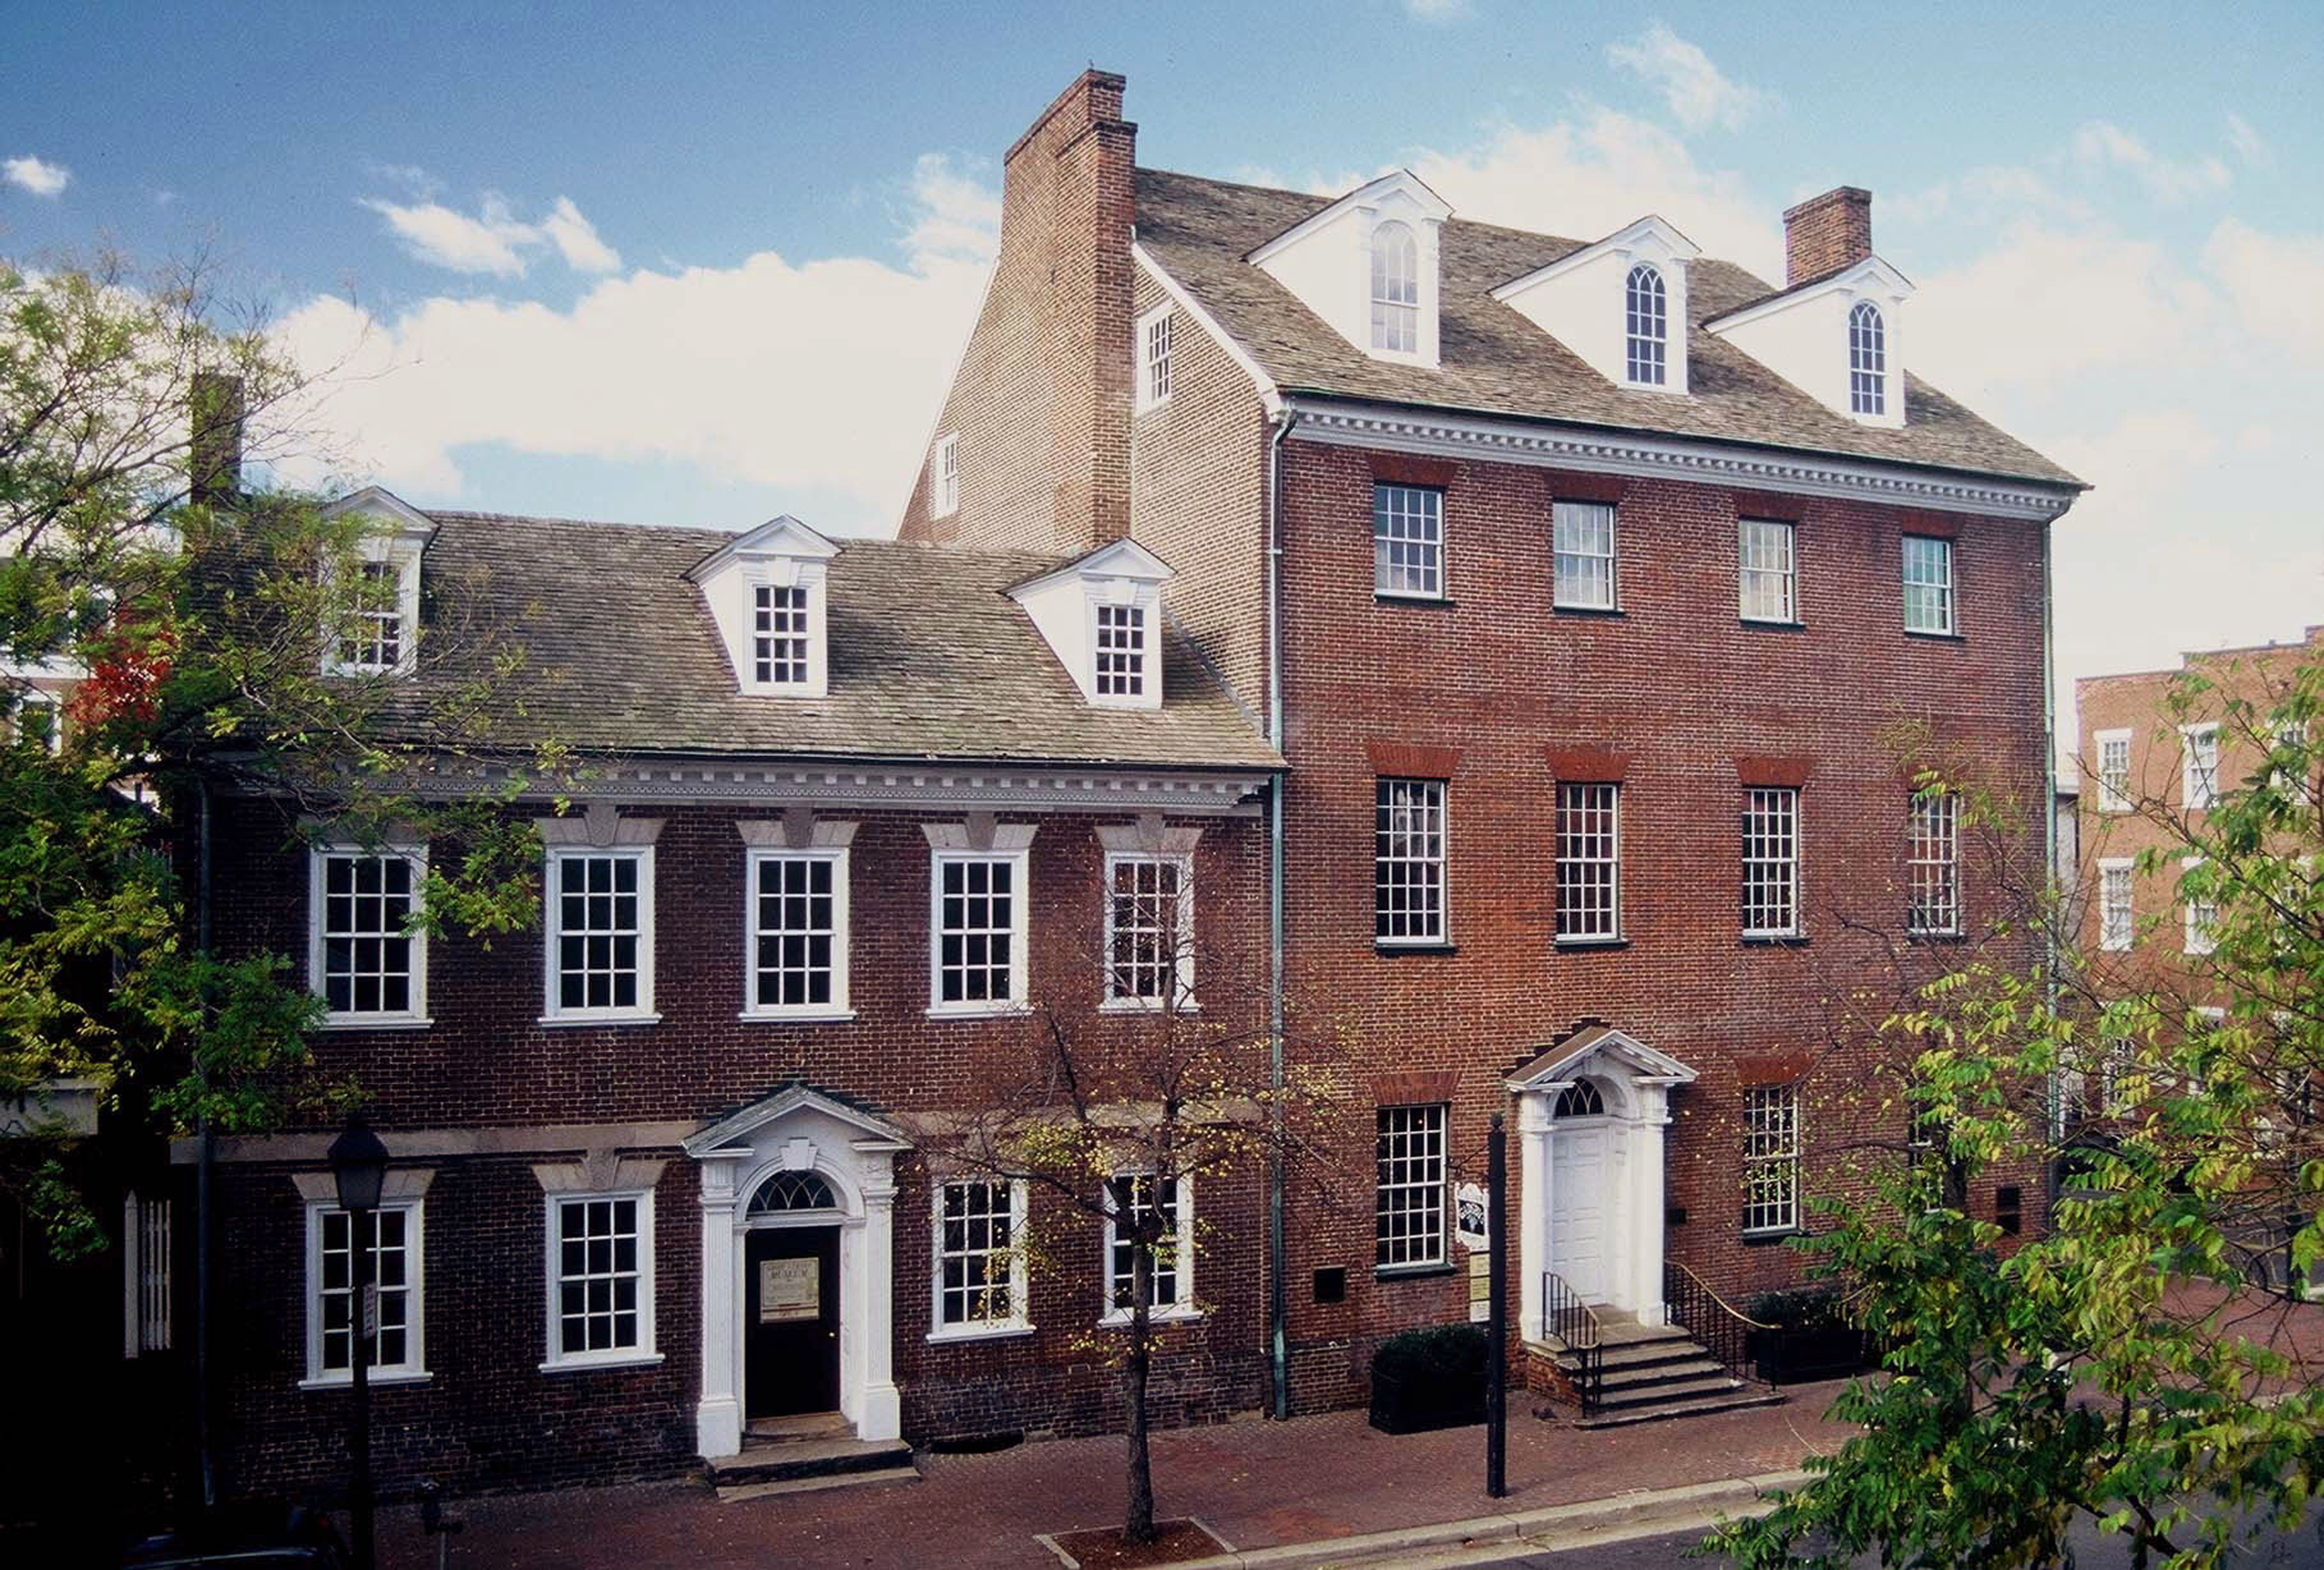 Tour Gadsby’s Tavern Museum with special National Anthem exhibit